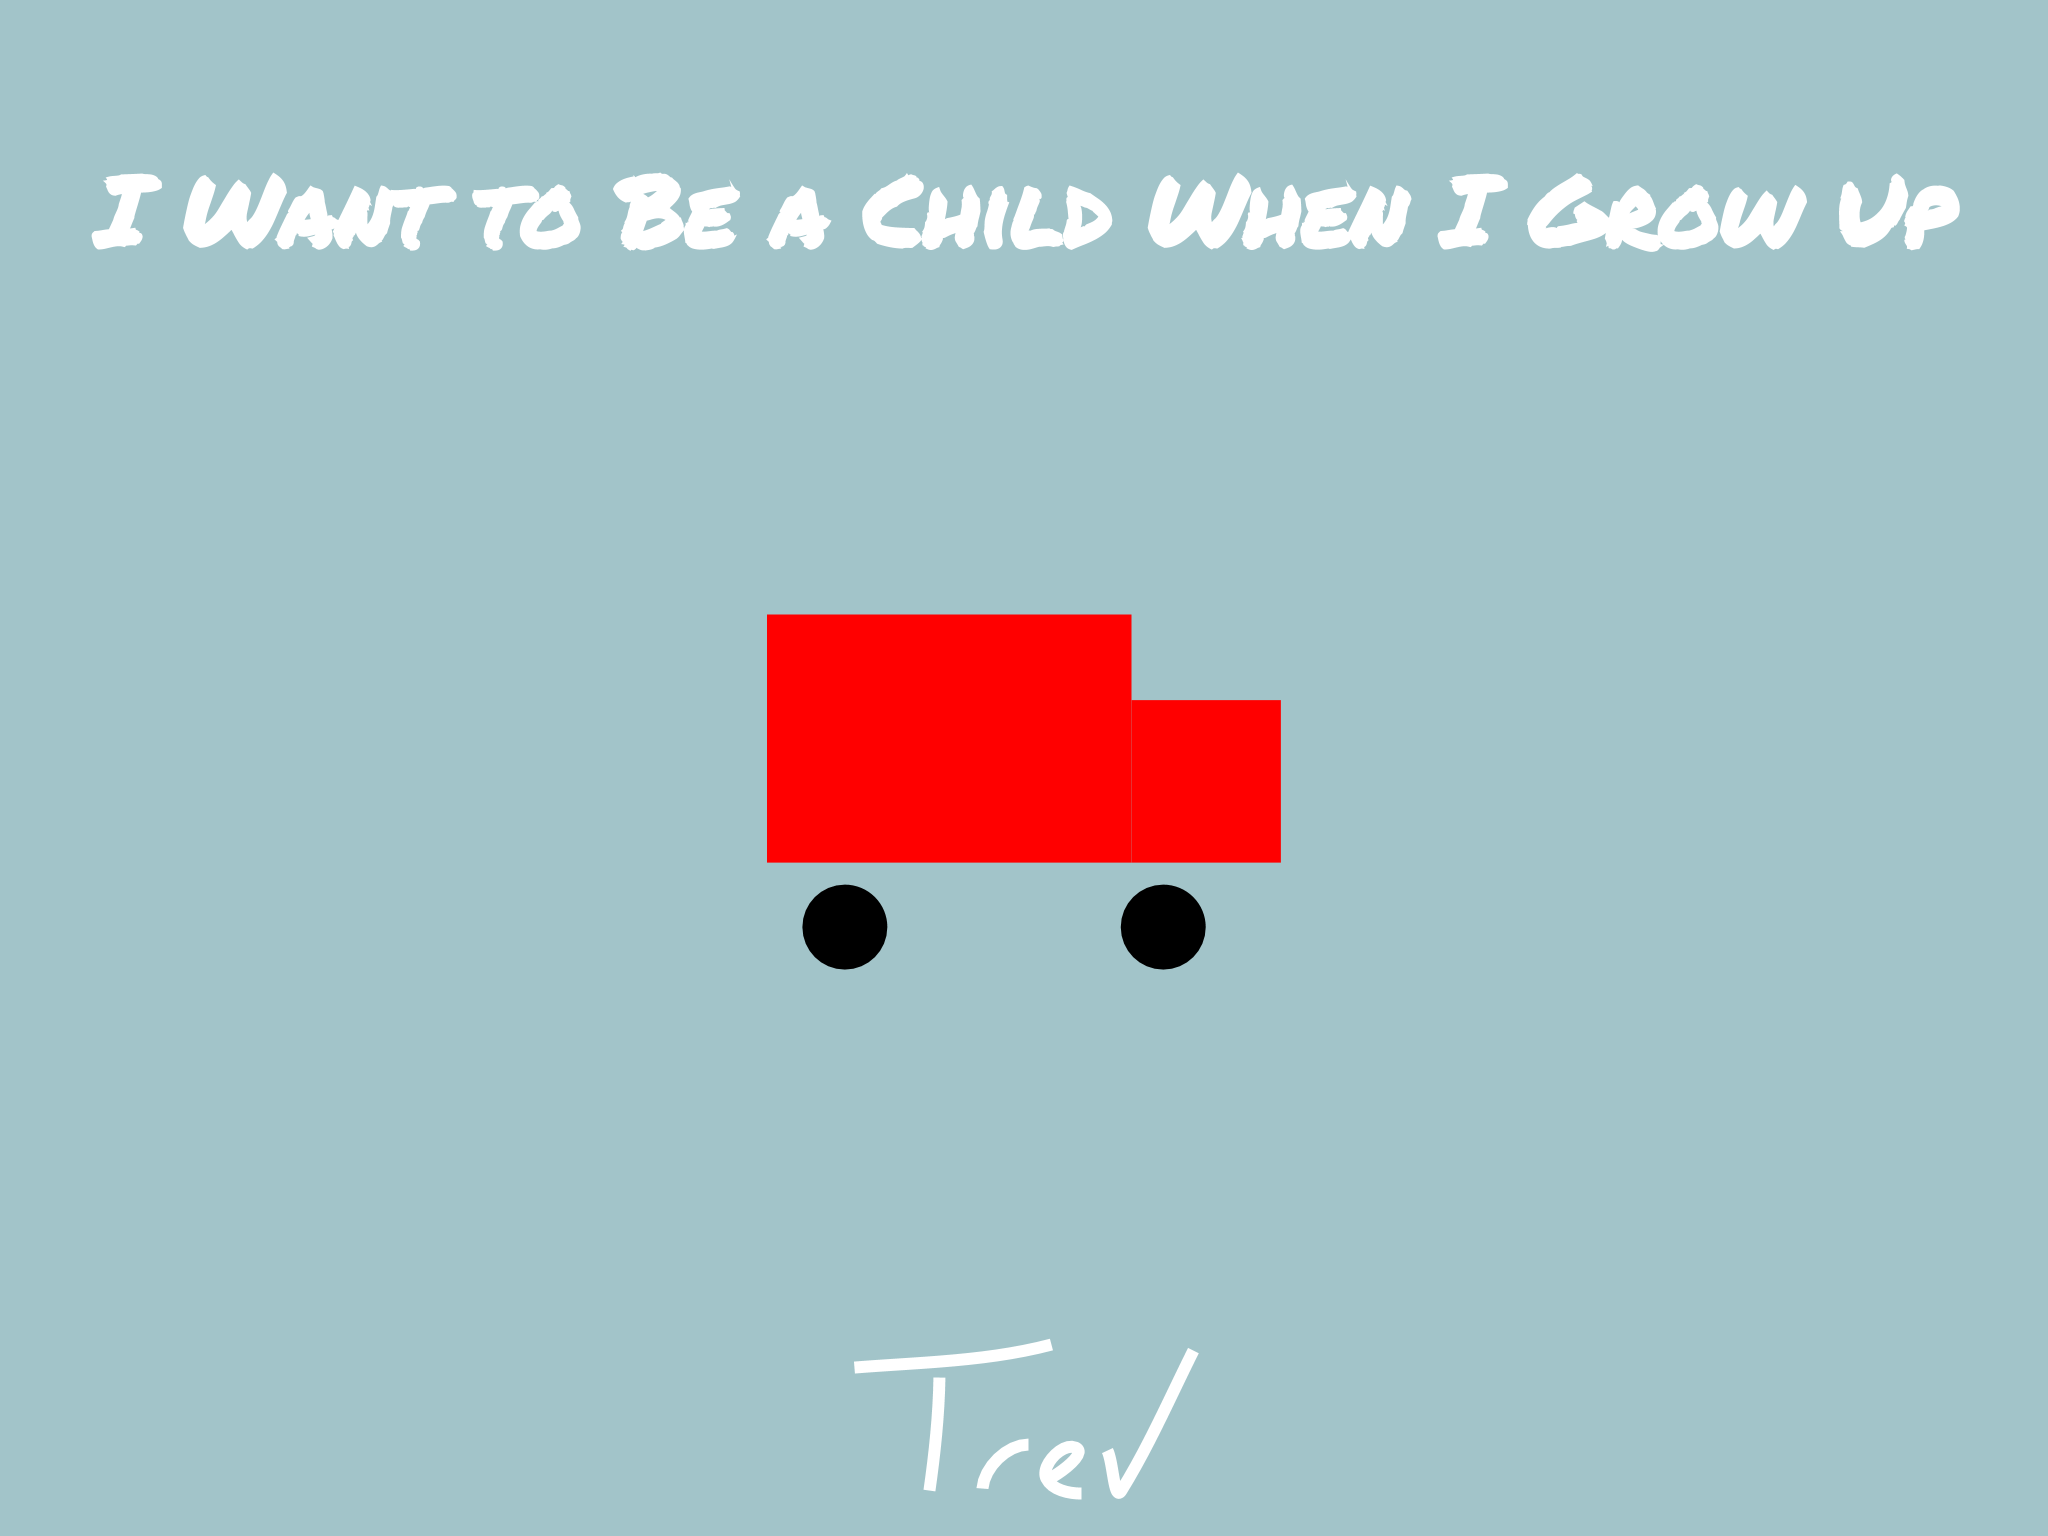 I Want To Be a Child When I Grow Up